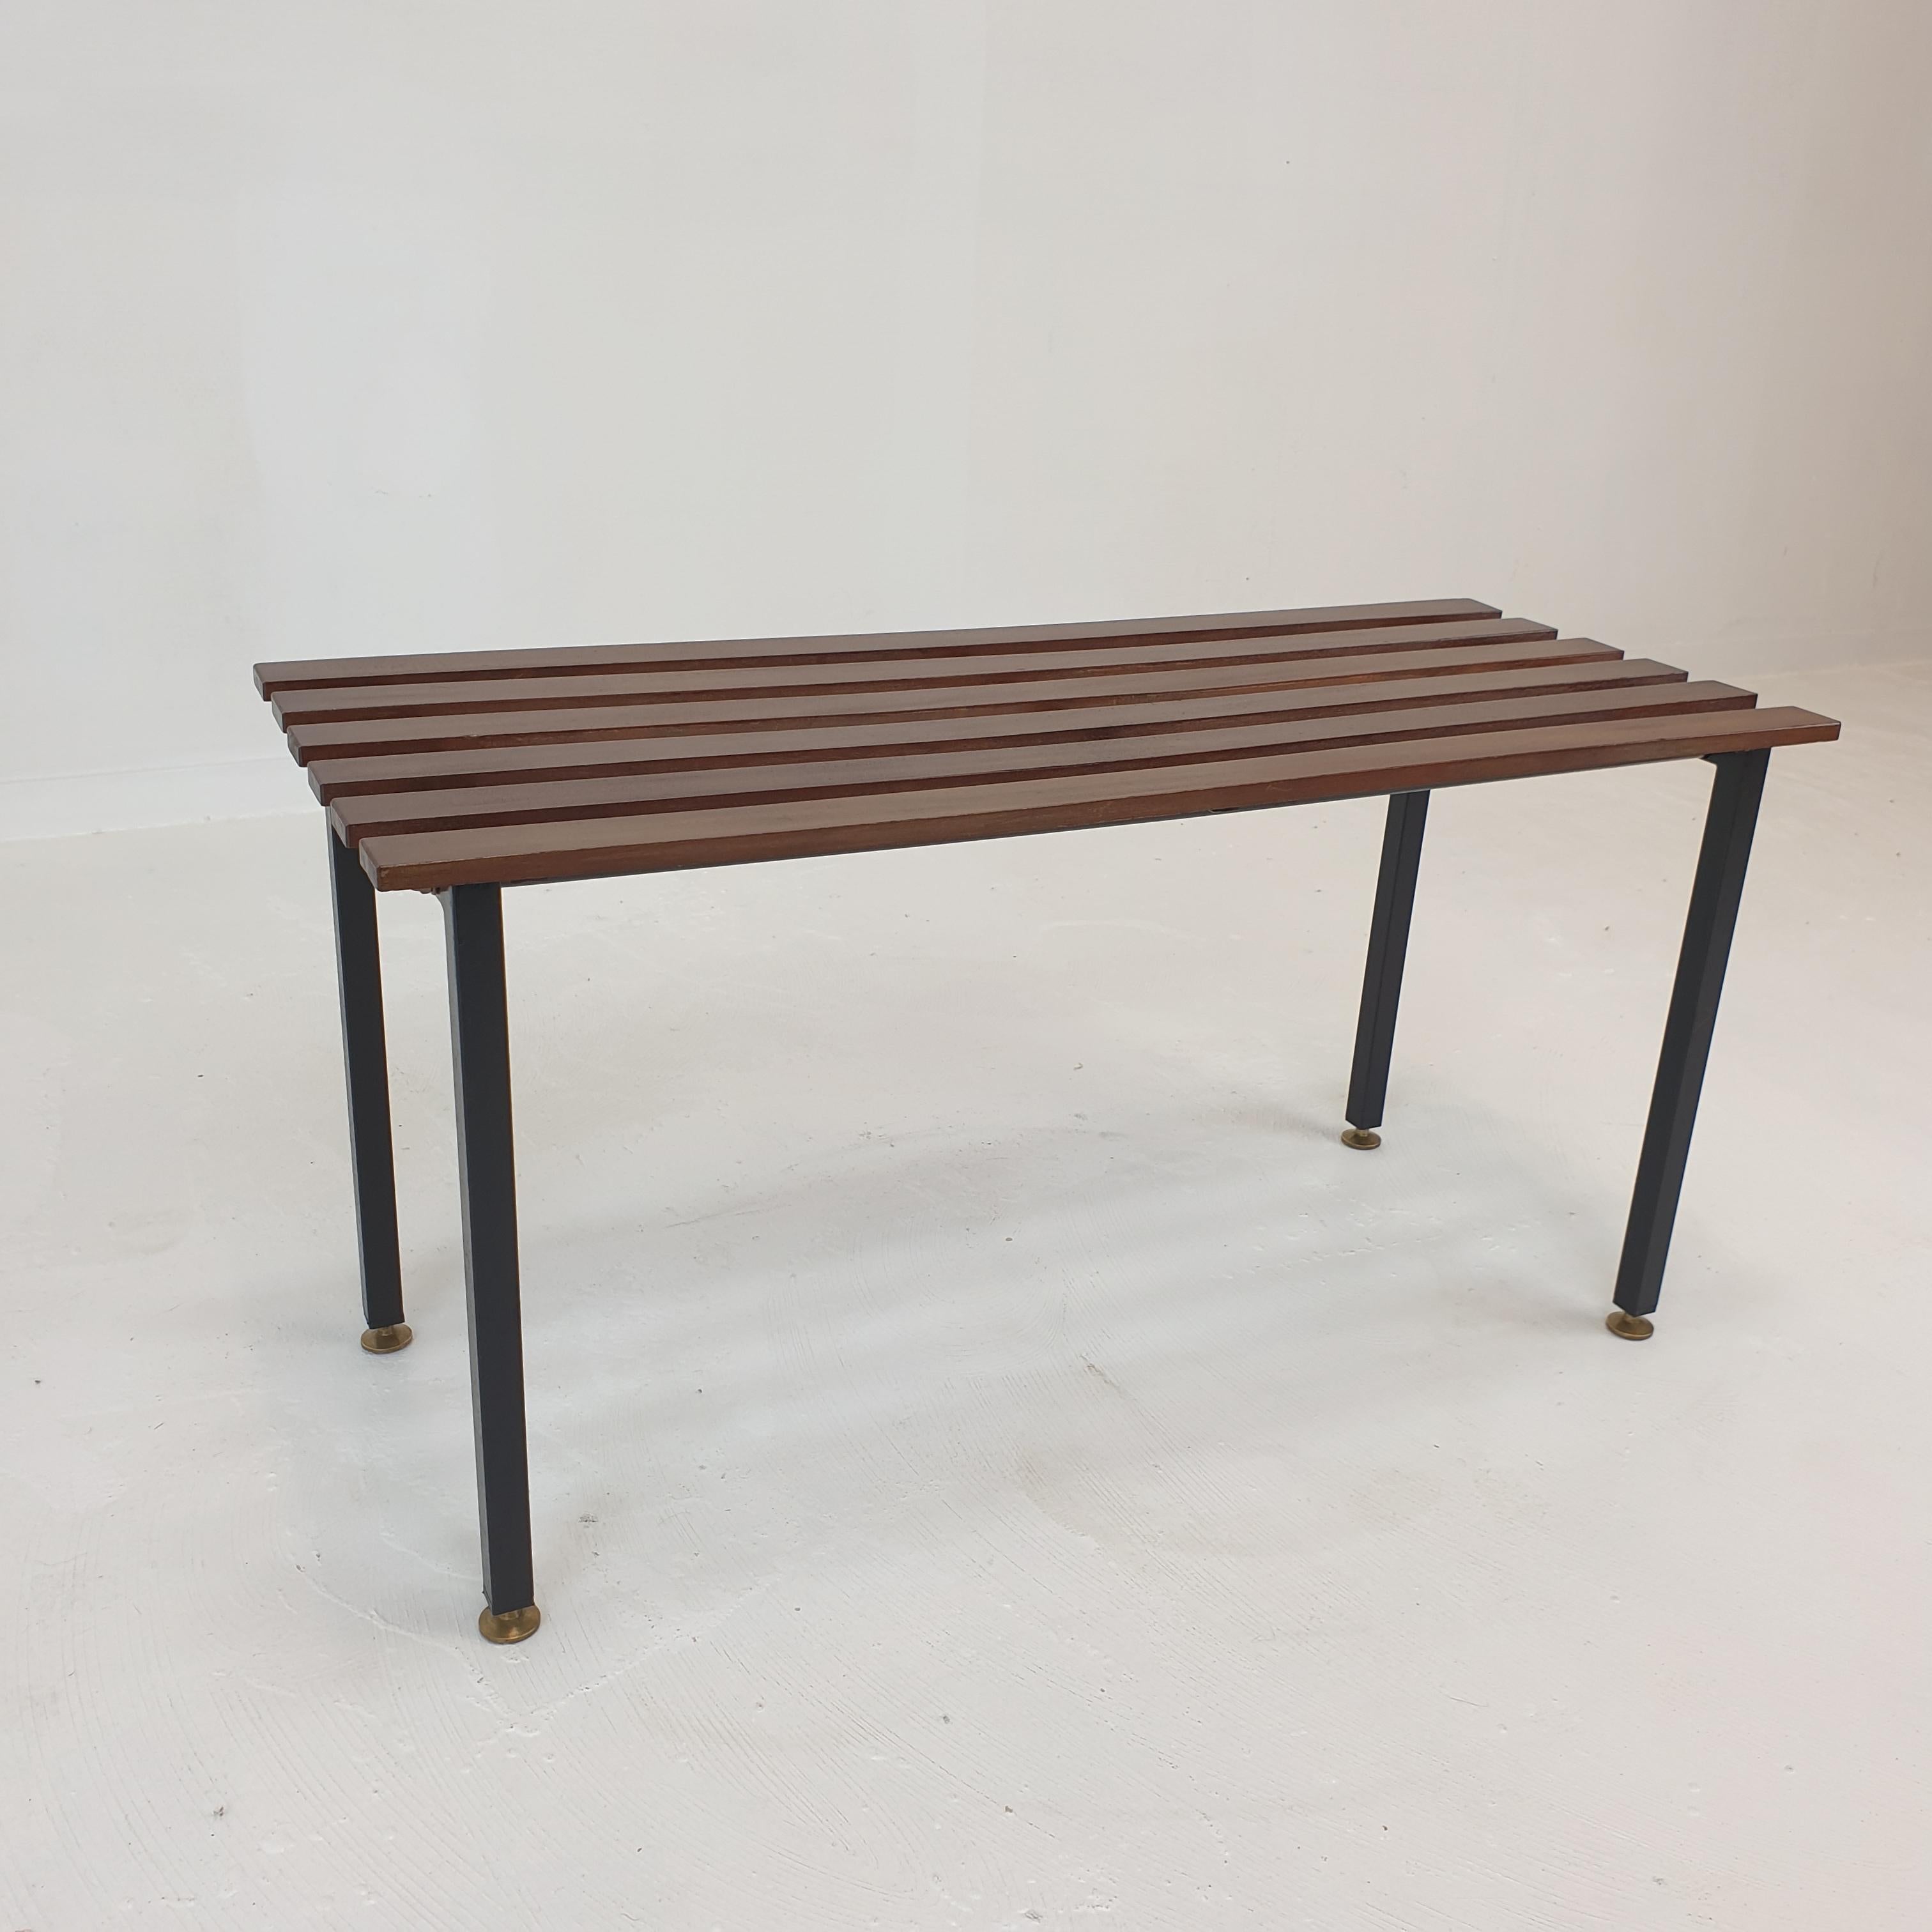 Steel Mid-Century Bench in Teak with Brass Feet, Italy, 1950s For Sale